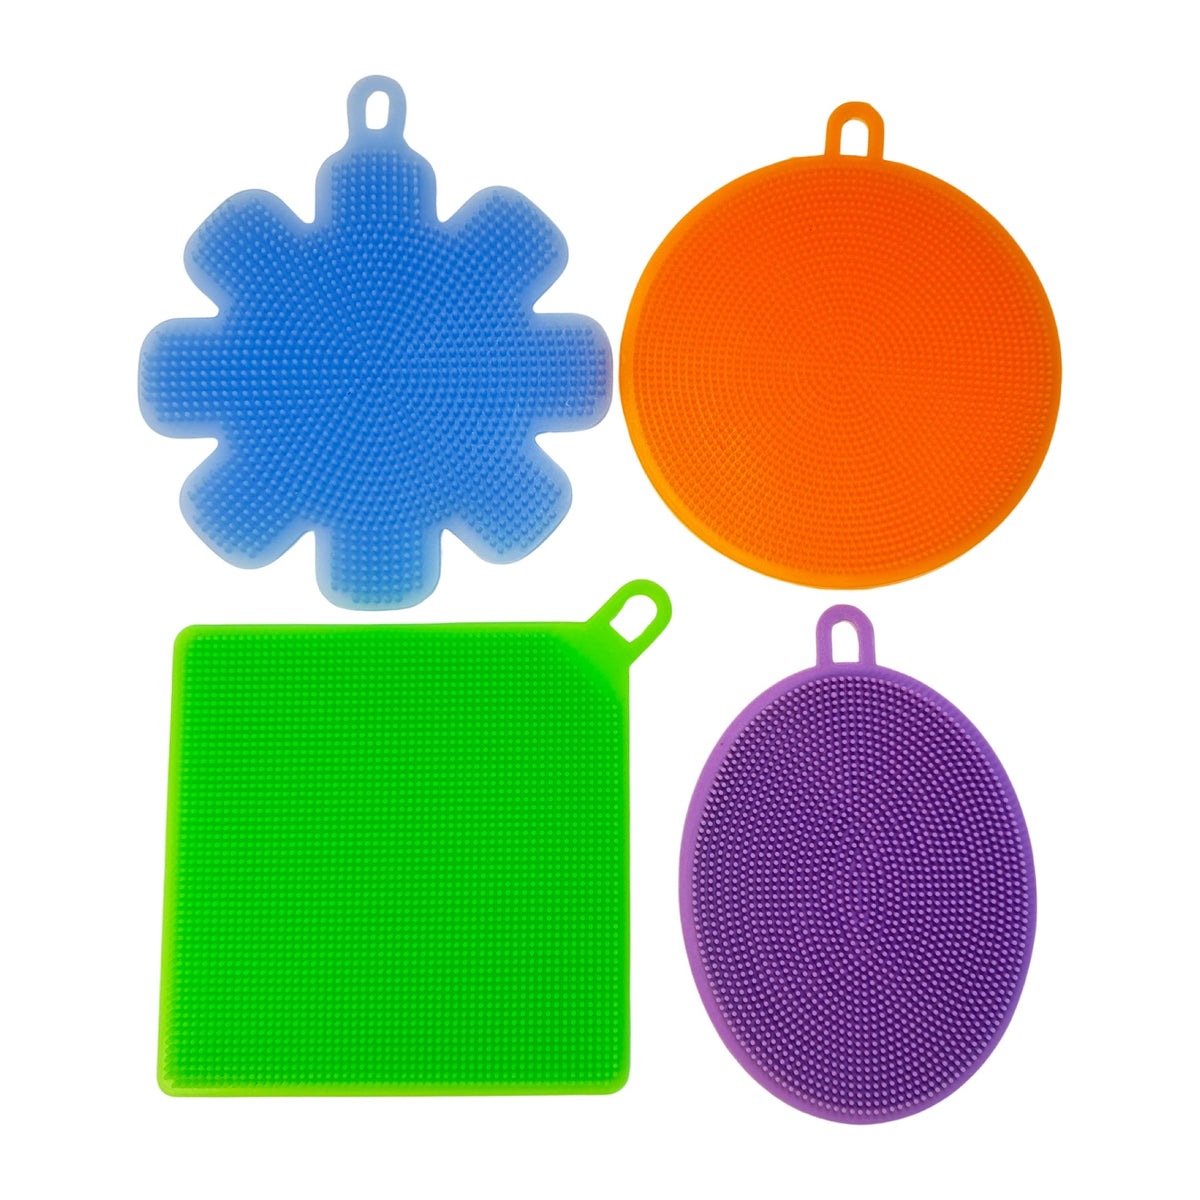 4pk Double Sided Silicone Scrubber Sponge Set - Clean Surfaces & Dishes Without Scratching